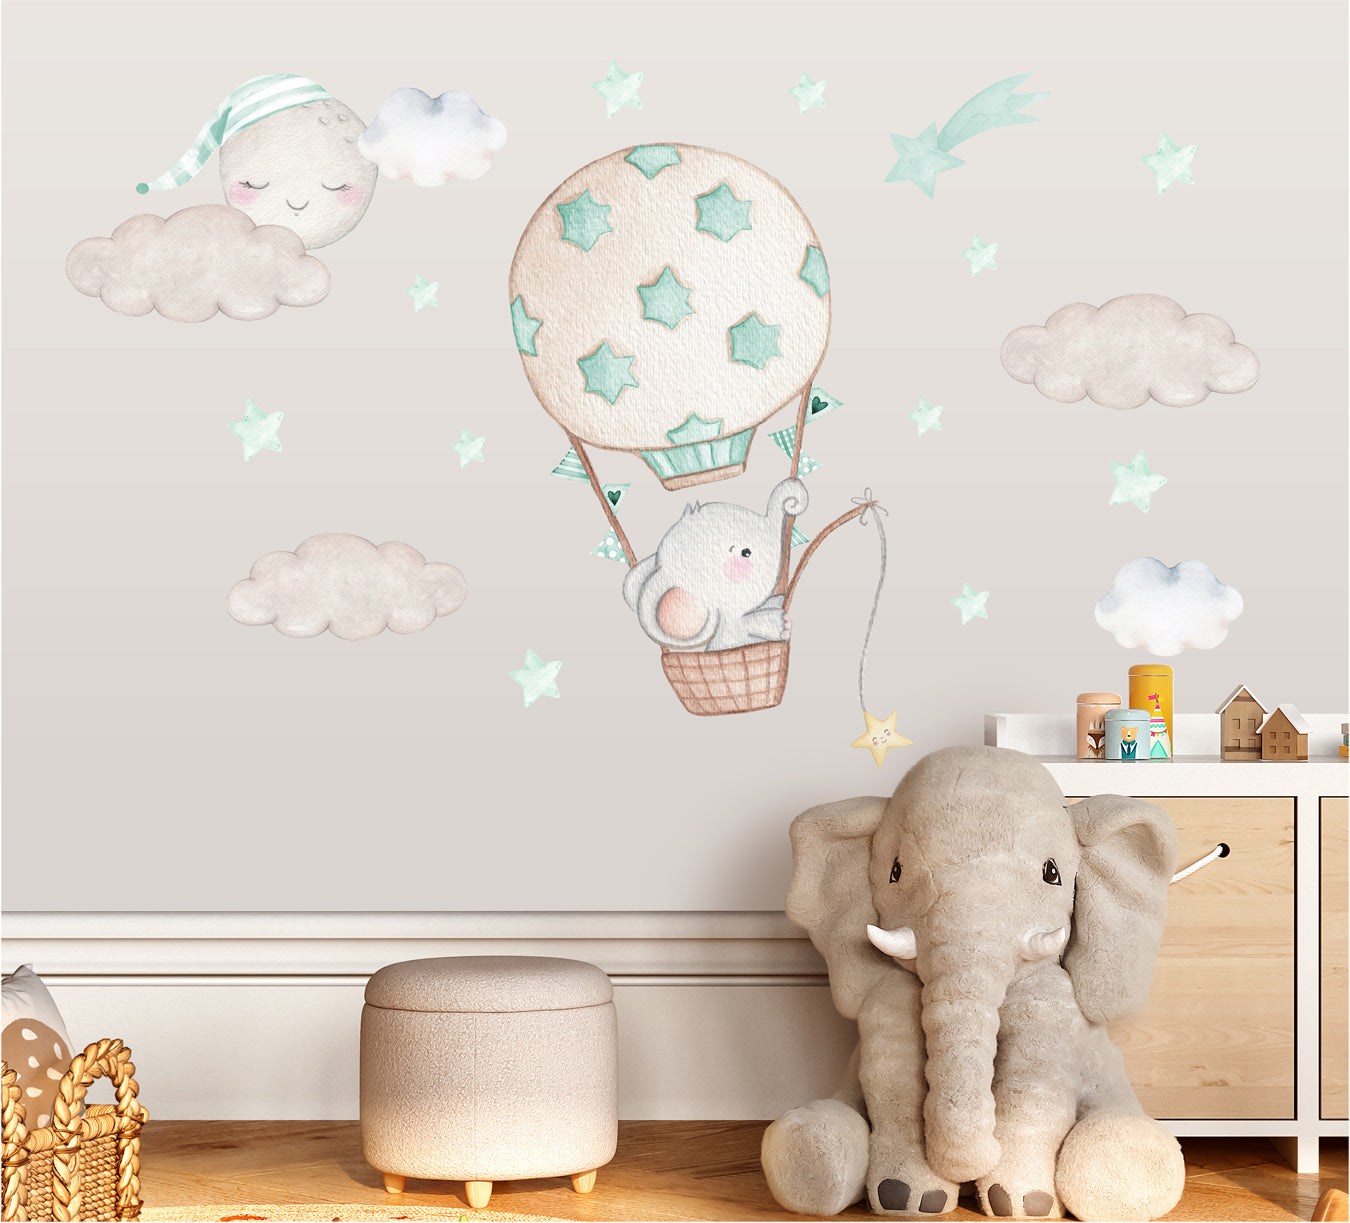 The elephant in the balloon. Baby nursery wall stickers. Mint stars.